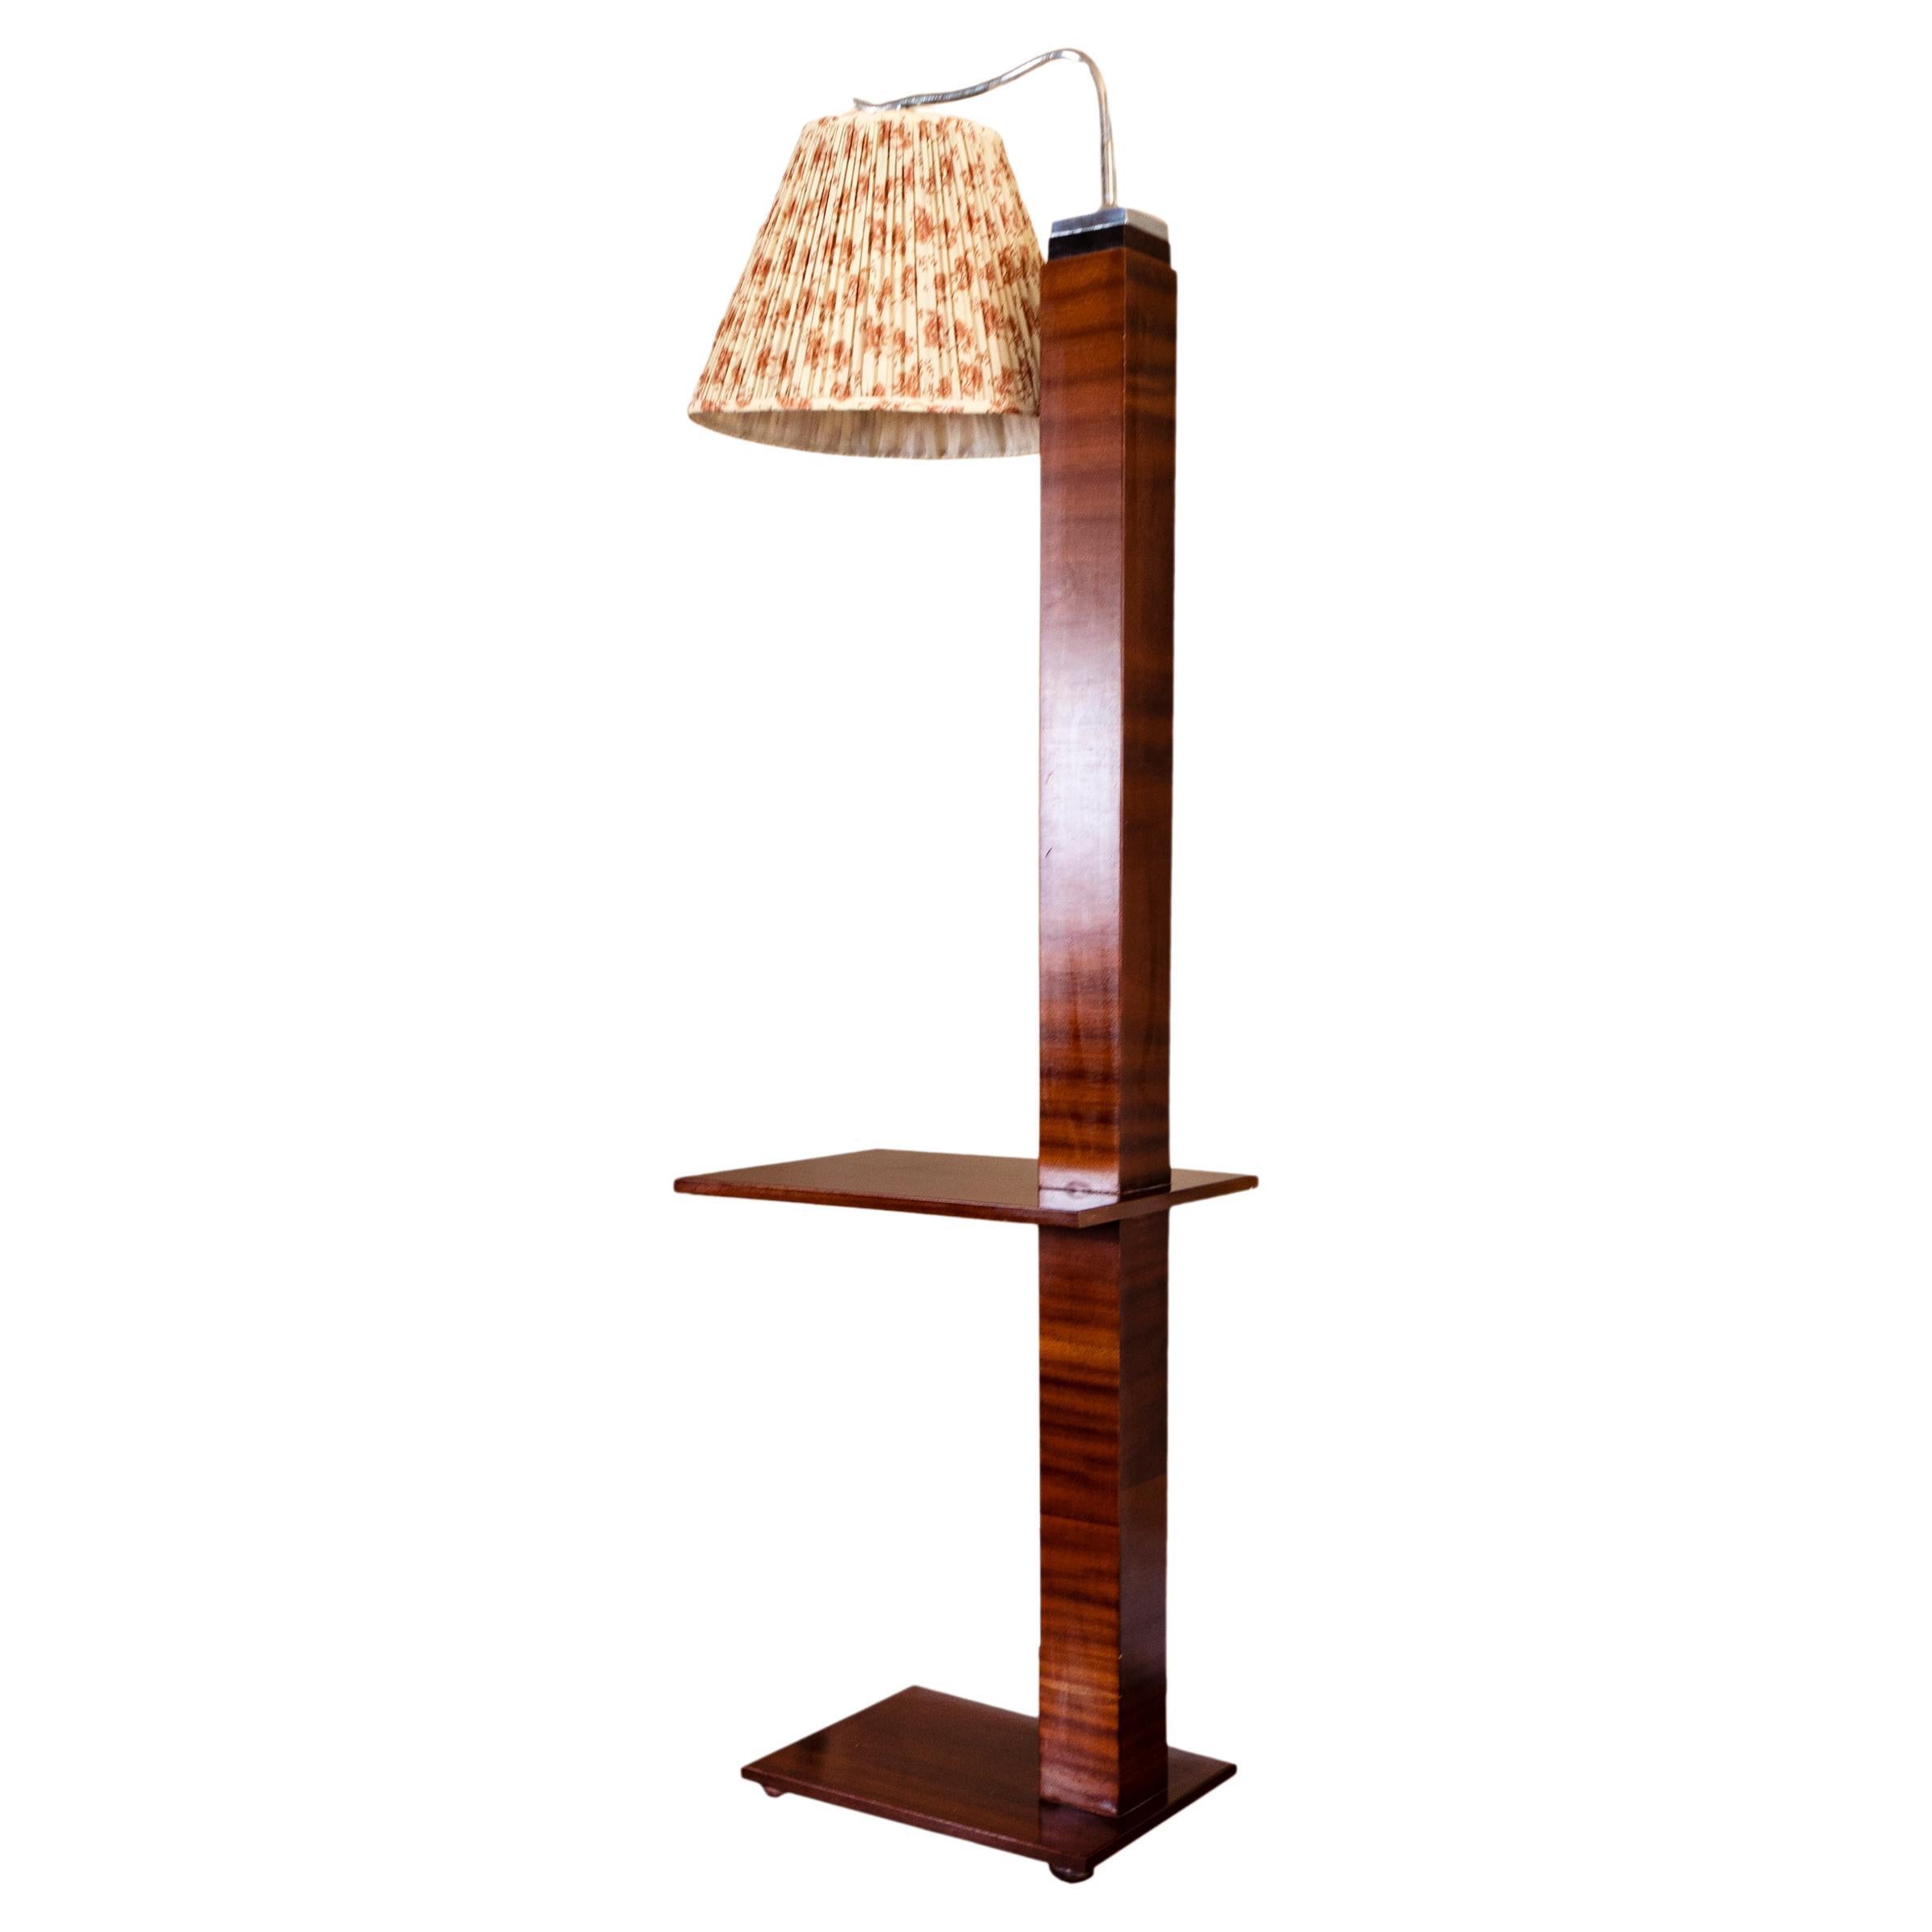  French Art Deco Floor Lamp, 20th Century For Sale 2